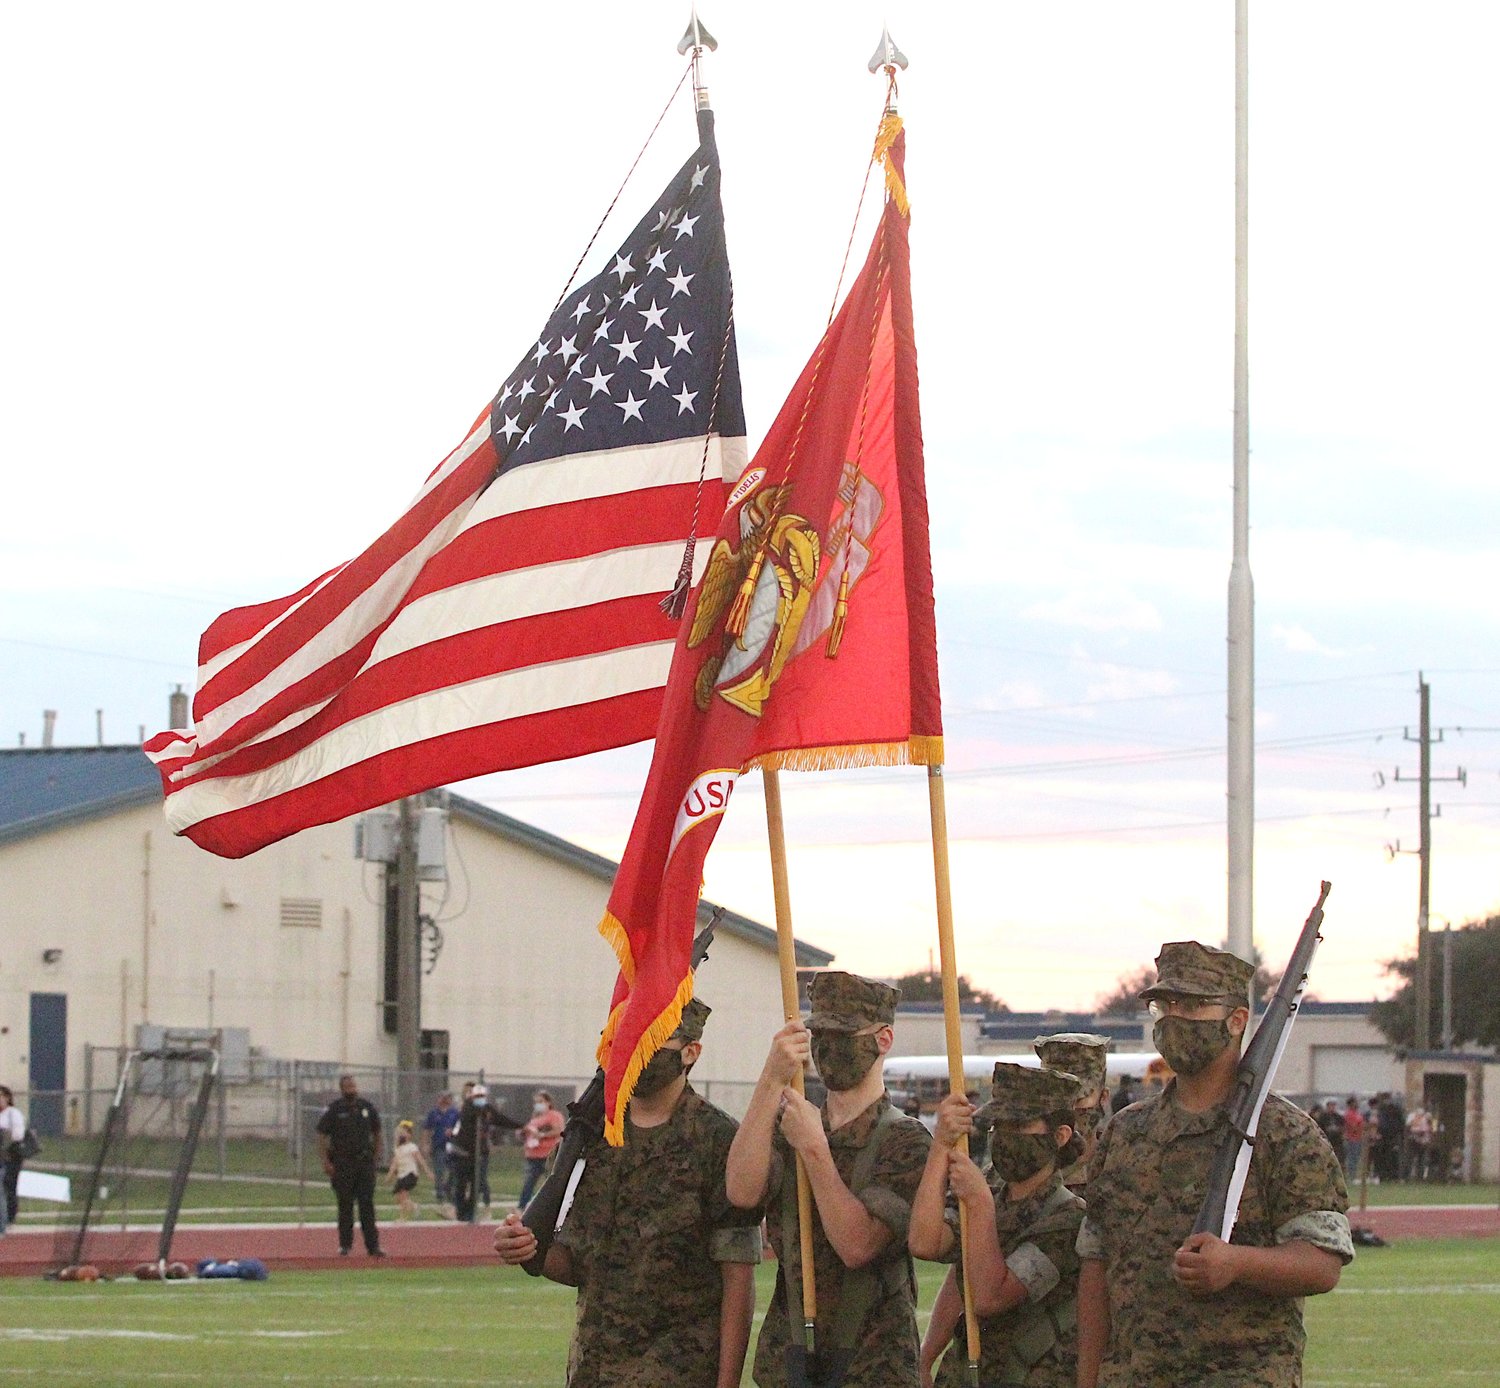 Royal High School’s MCJROTC presented the colors at the Falcons’ district-opening contest against the Sealy Tigers on Oct. 9, 2020 at Falcon Stadium in Brookshire.